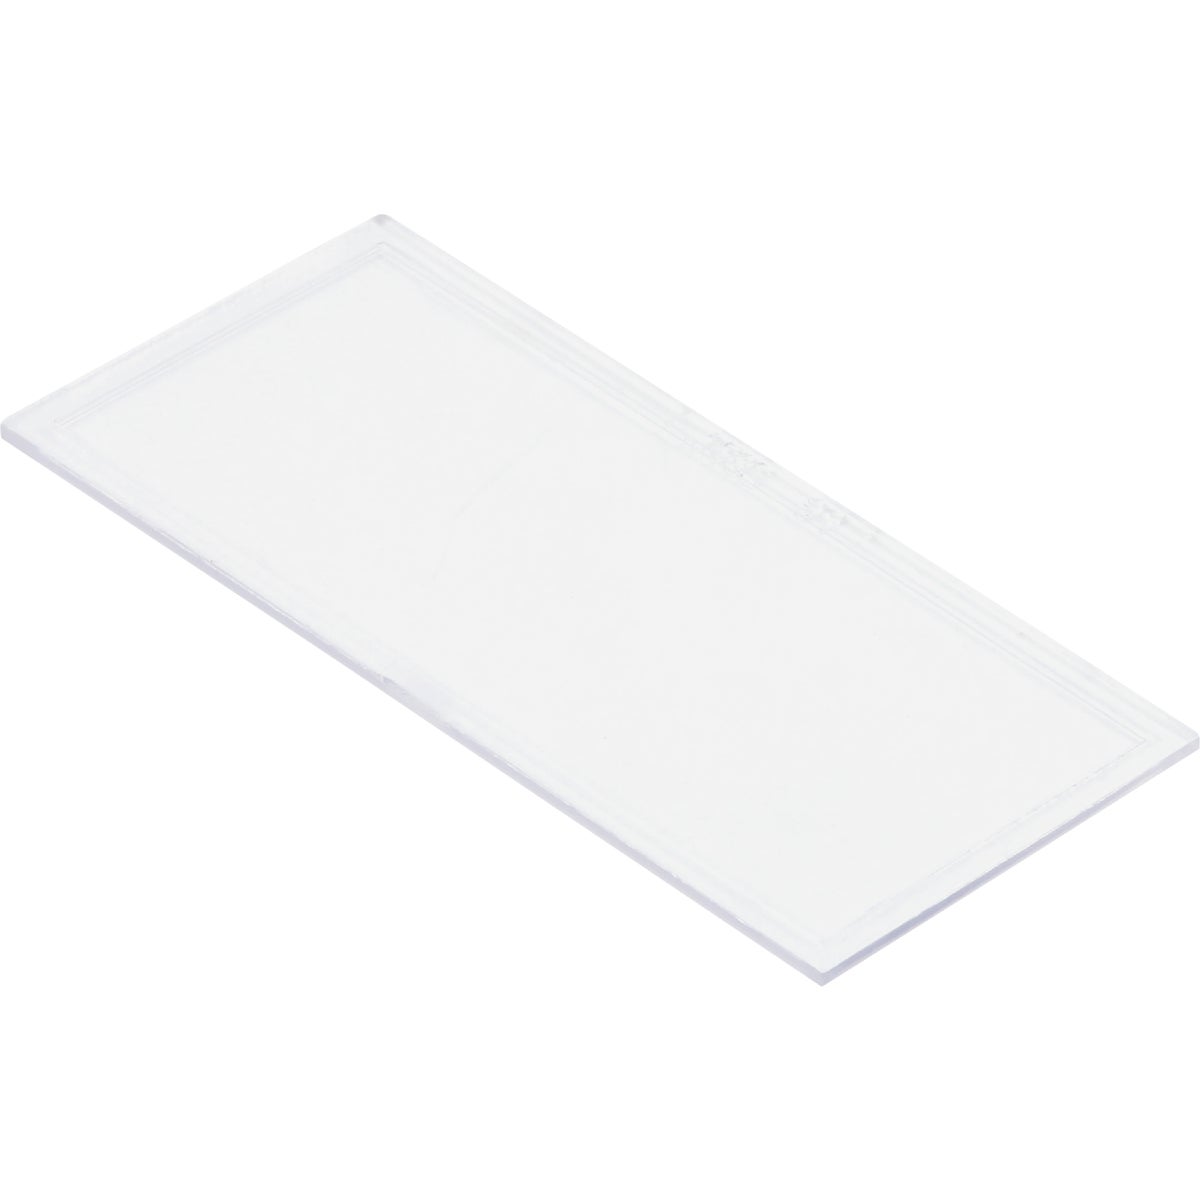 Item 366331, Clear plastic cover lenses offer protection from dust, weld spatter, and 